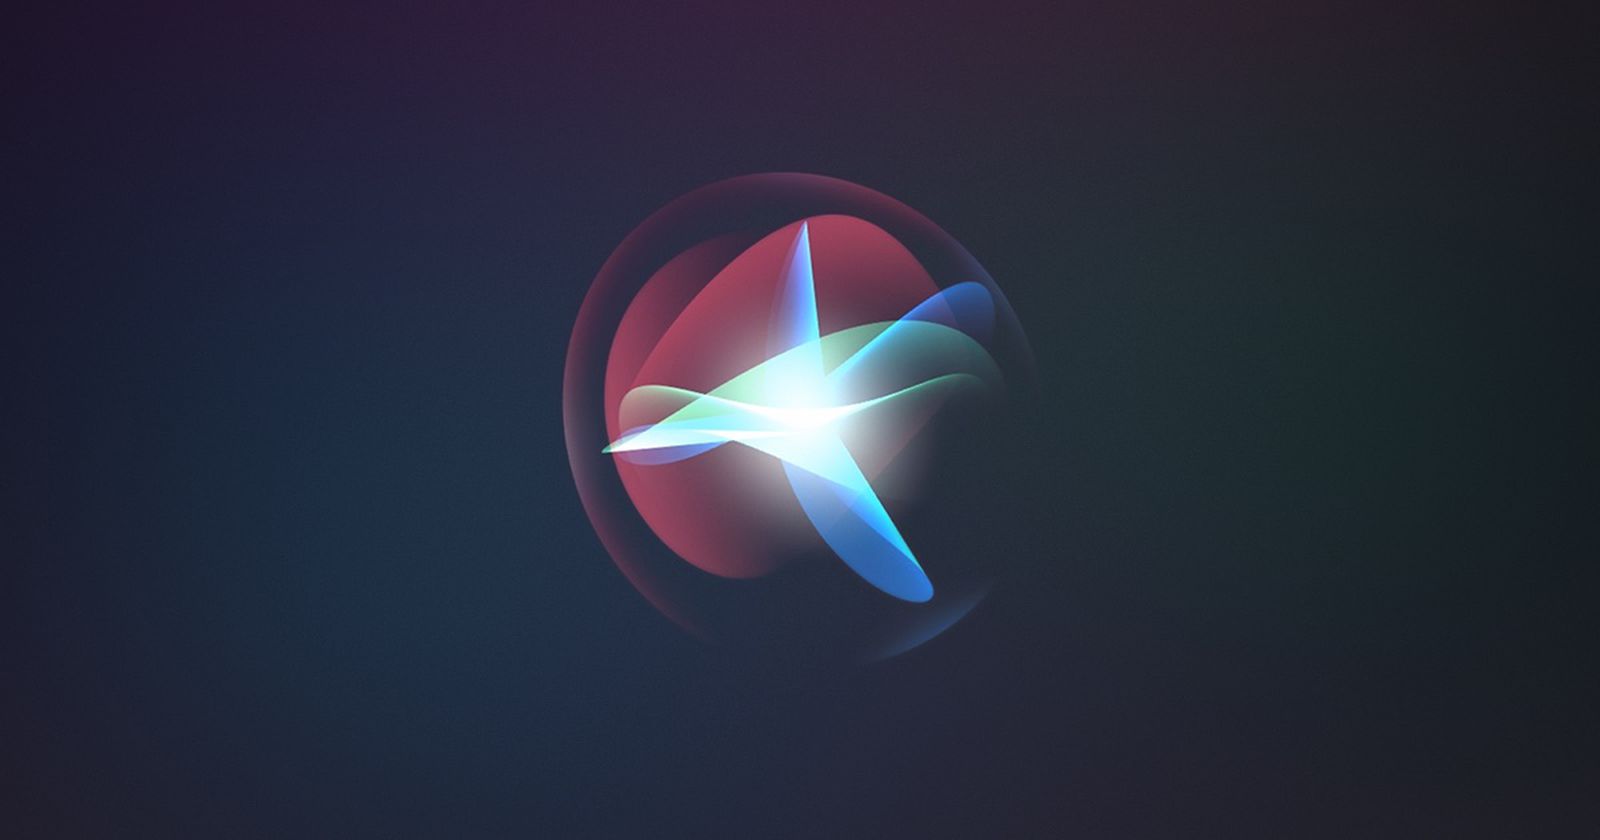 Apple Scrapped Plans to Let Users Use Siri to Make Purchases Due to Privacy Conc..